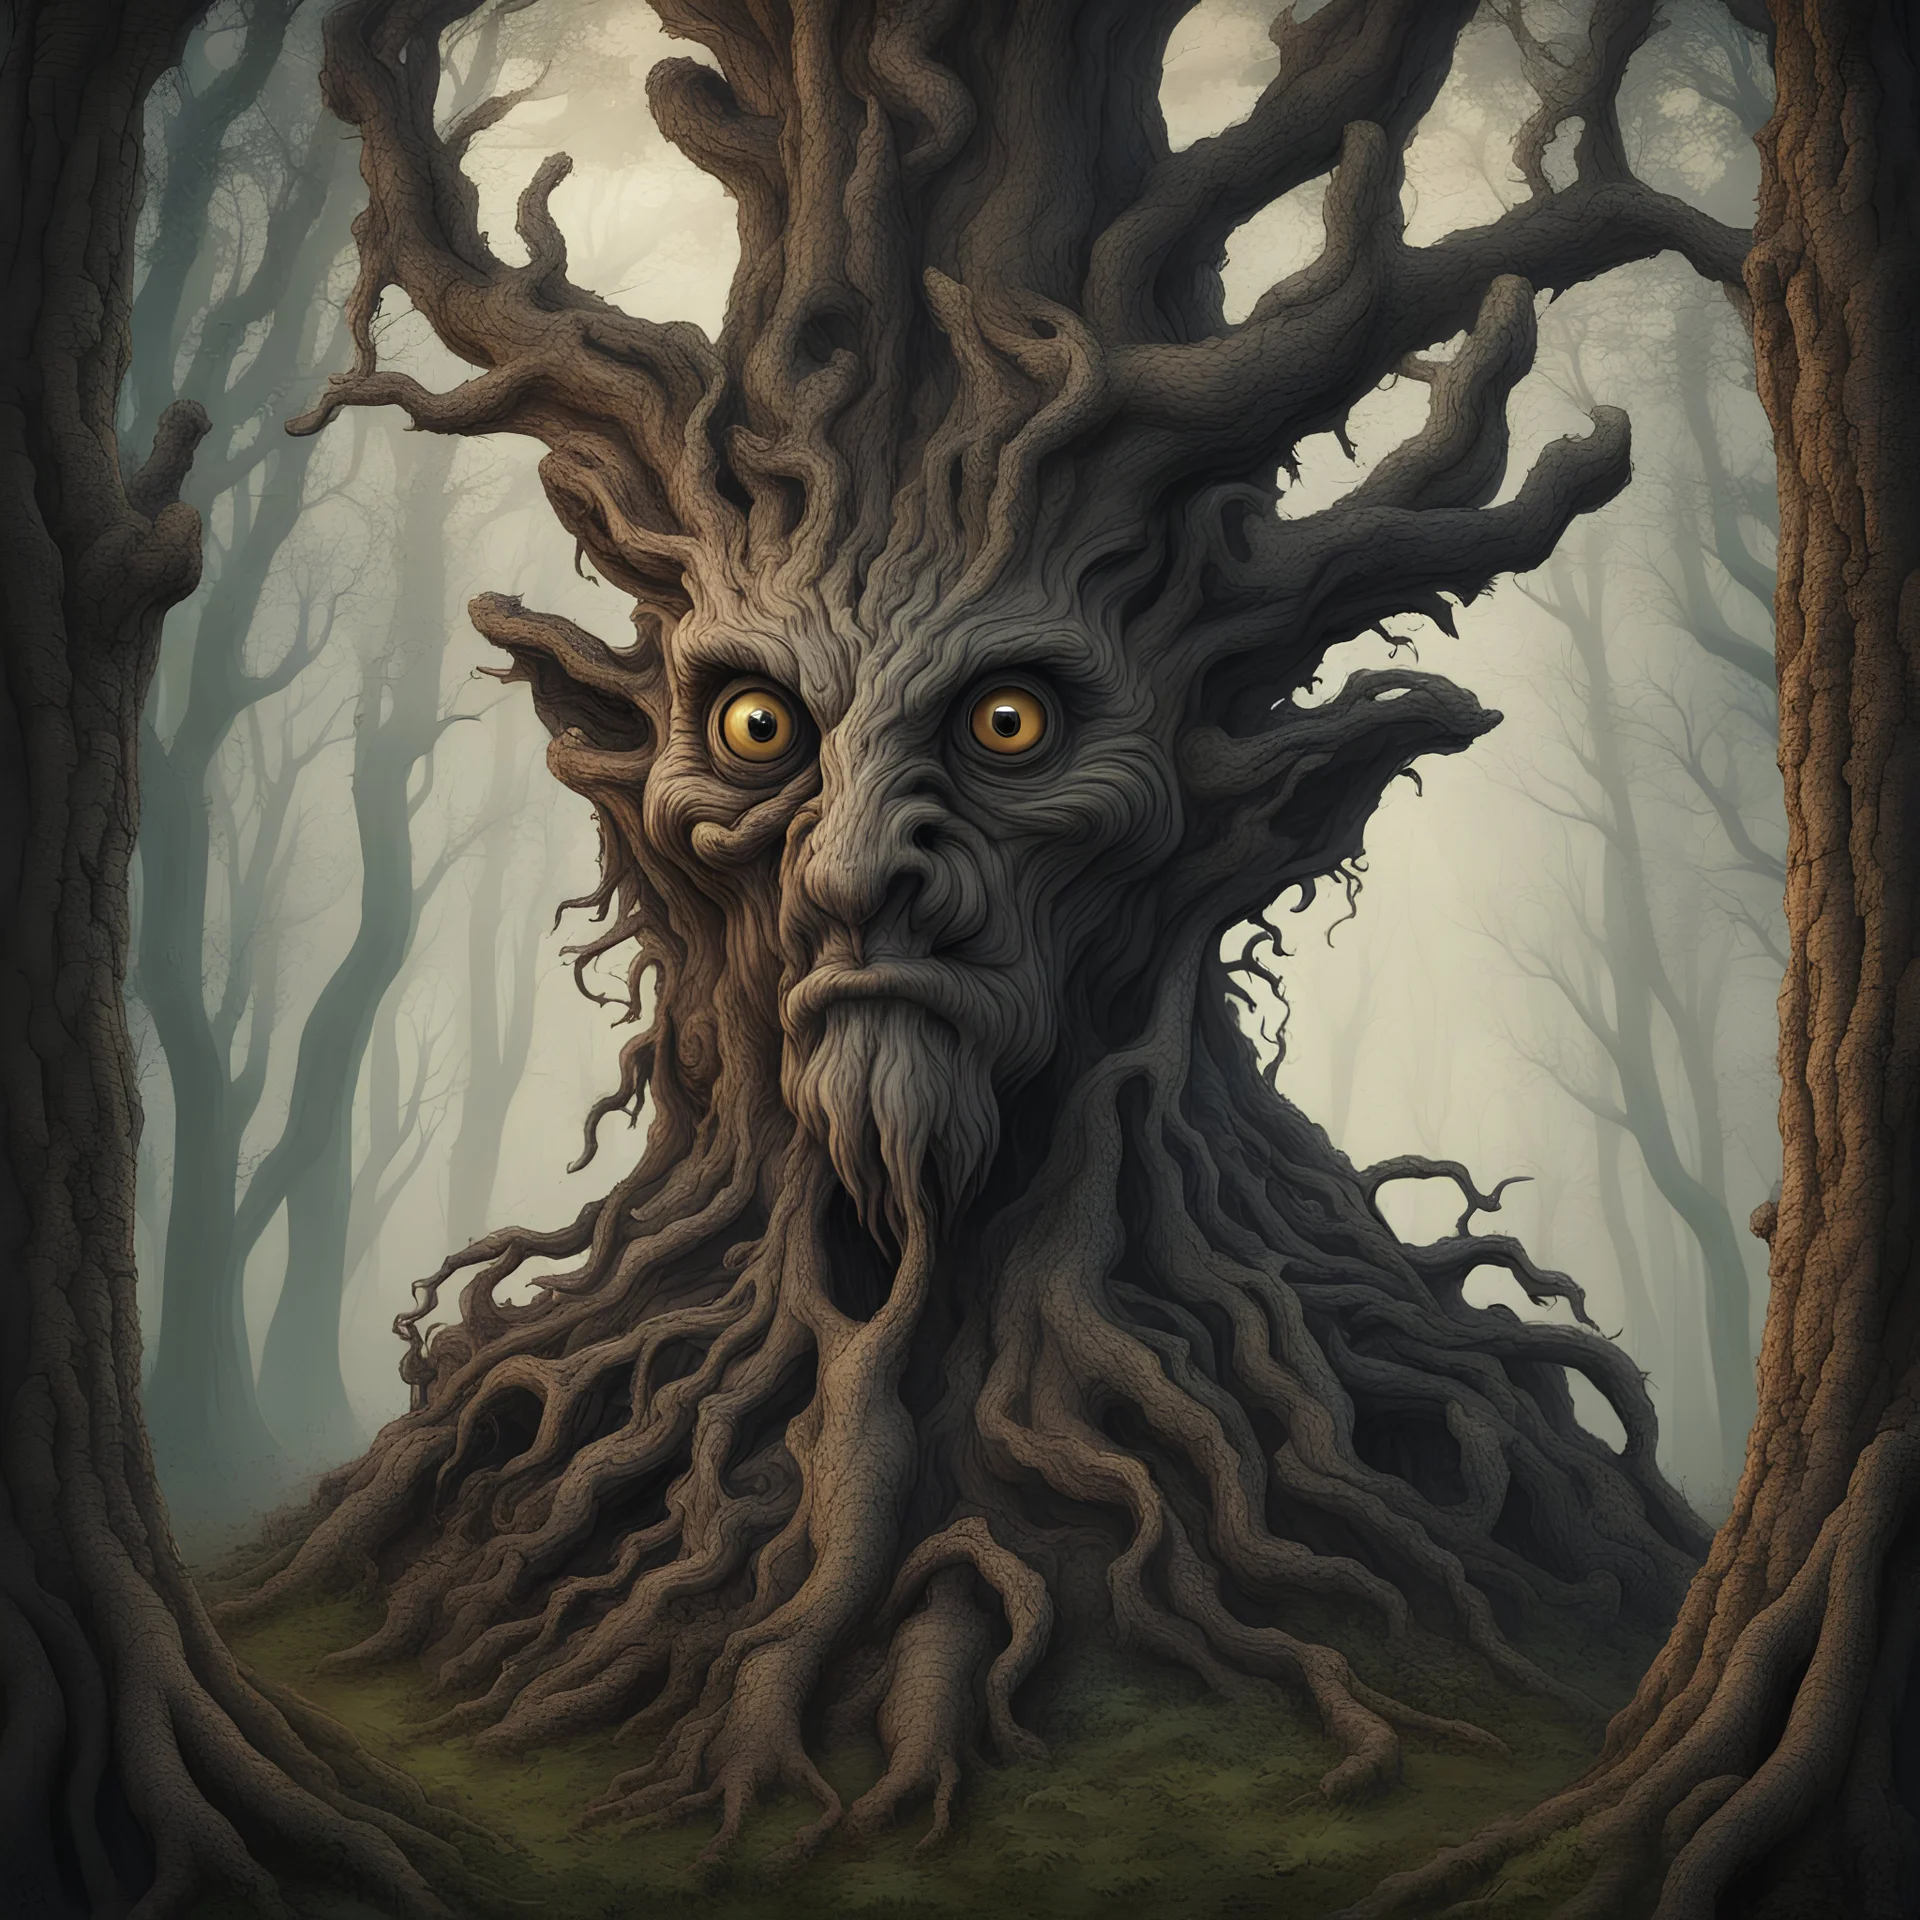 Treant with scary eyes and ebony bark, in rococo art style, background forest